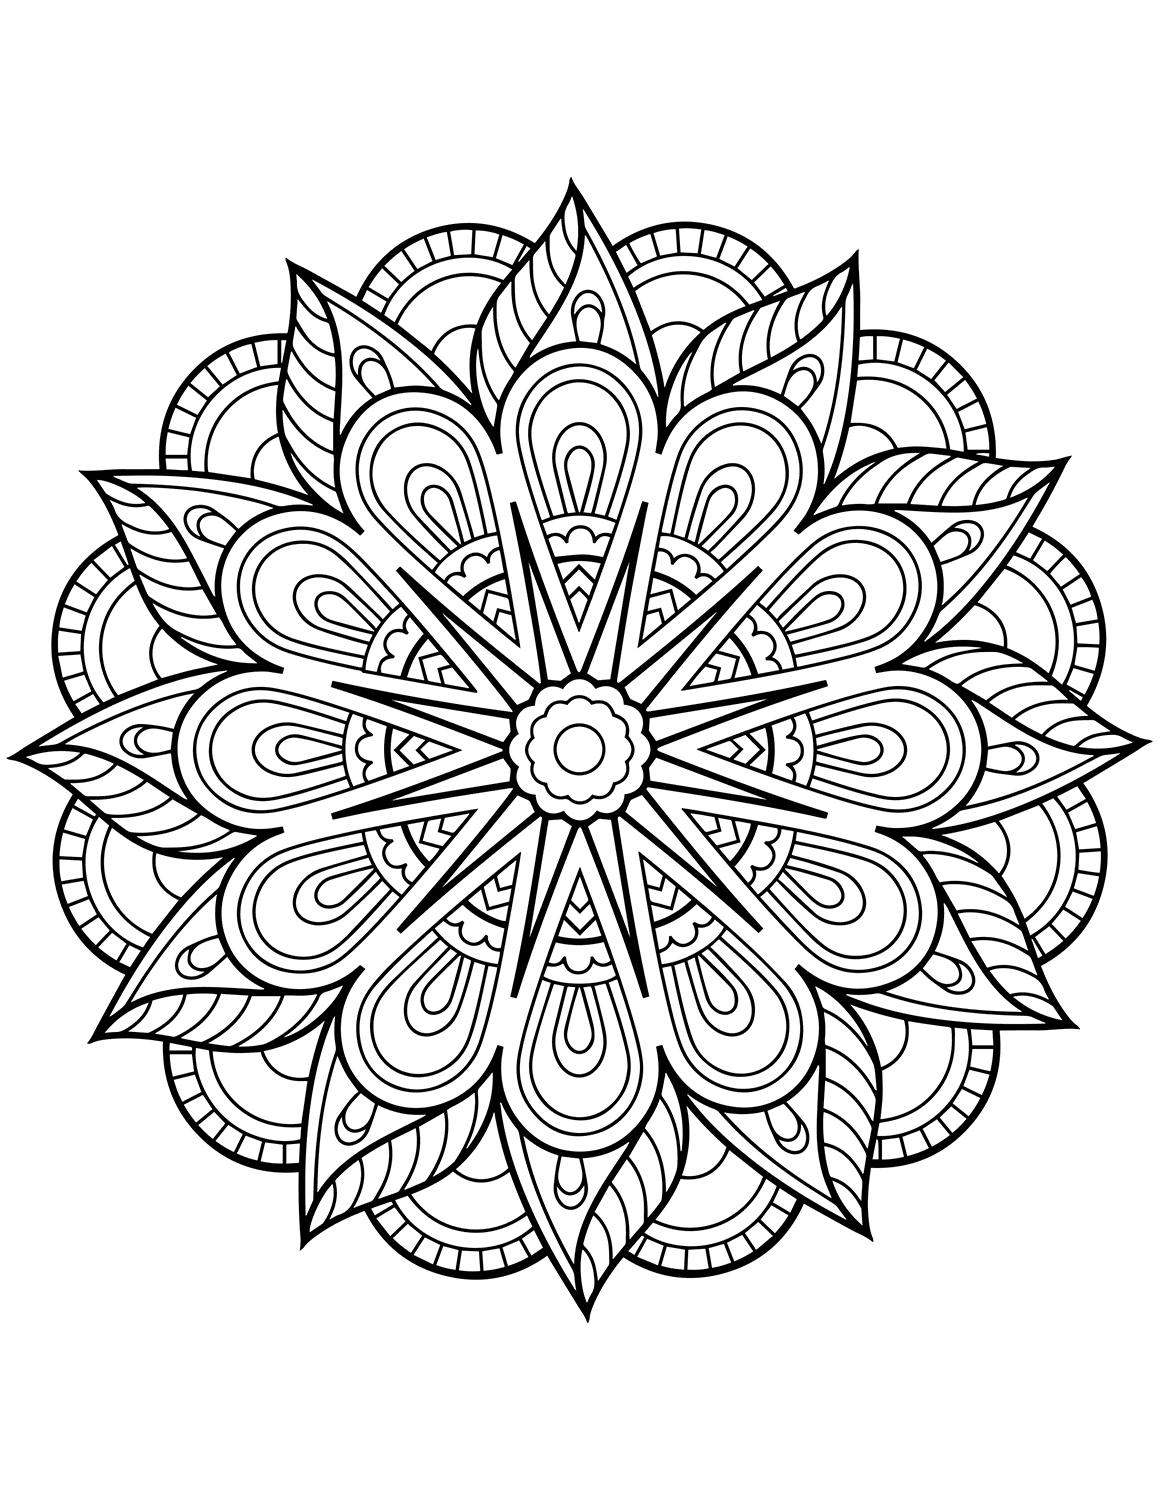 Flower Mandala Coloring Pages Best Coloring Pages For Kids